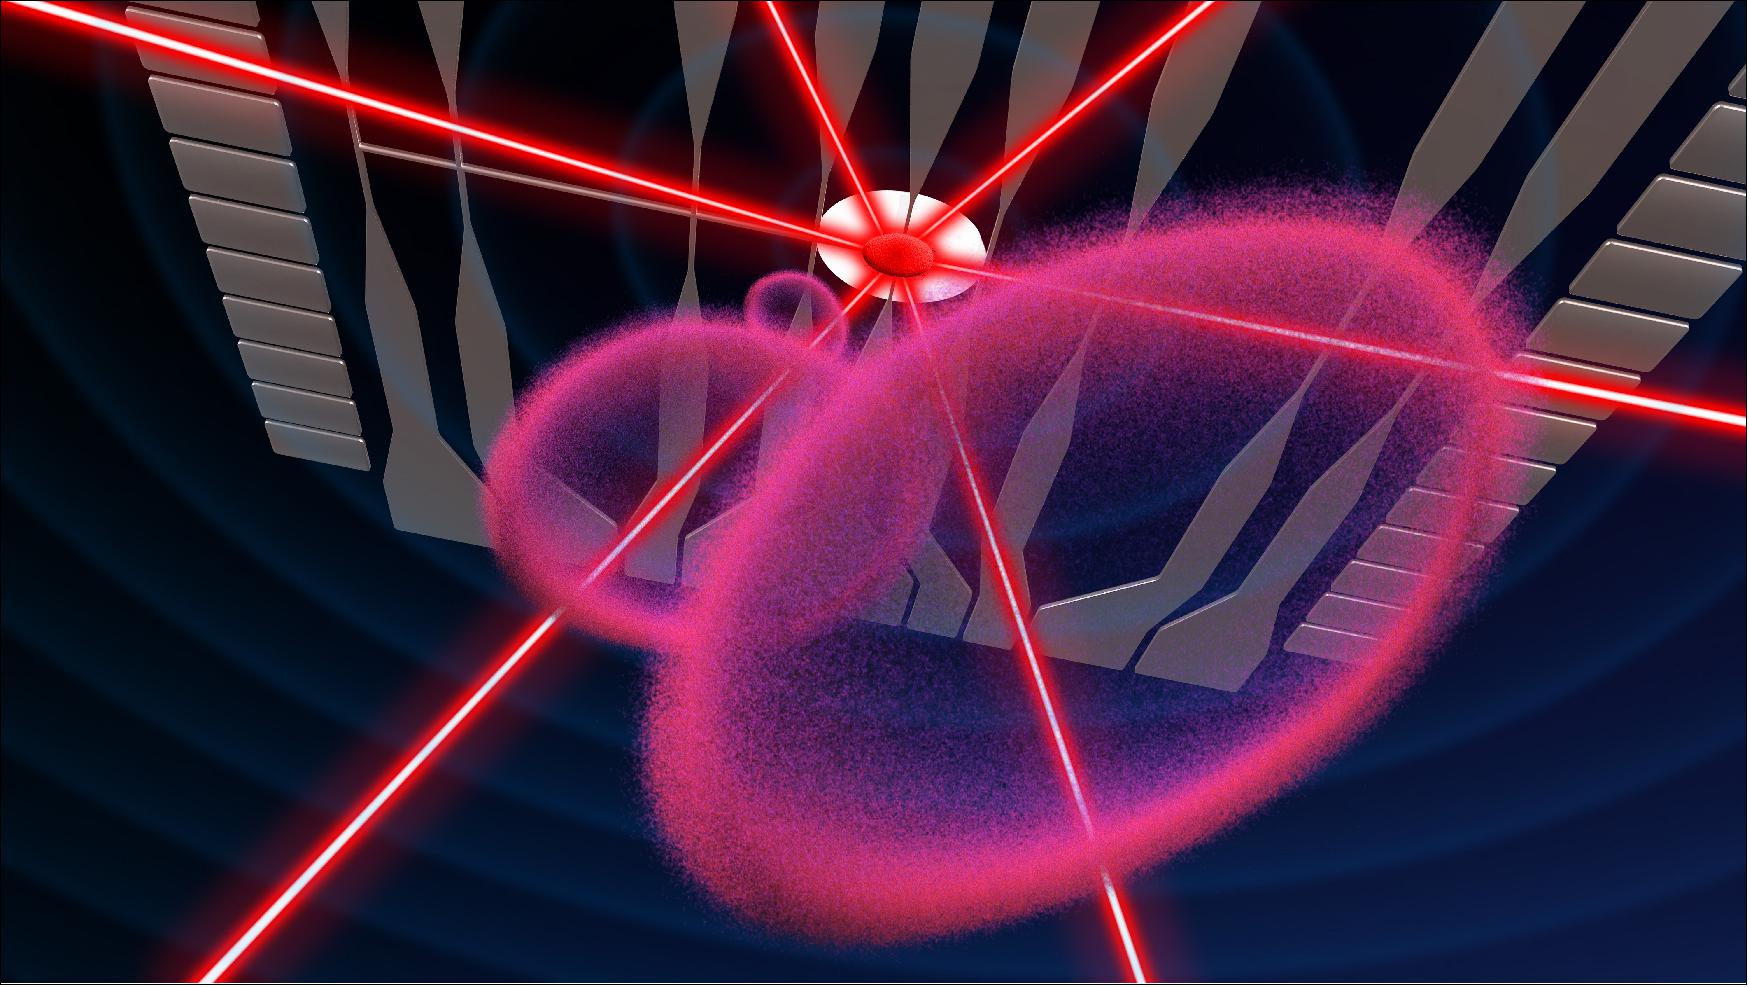 Figure 15: Inside NASA’s Cold Atom Lab, scientists form bubbles from ultracold gas, shown in pink in this illustration. Lasers, also depicted, are used to cool the atoms, while an atom chip, illustrated in gray, generates magnetic fields to manipulate their shape, in combination with radio waves (image credit: NASA/JPL-Caltech)